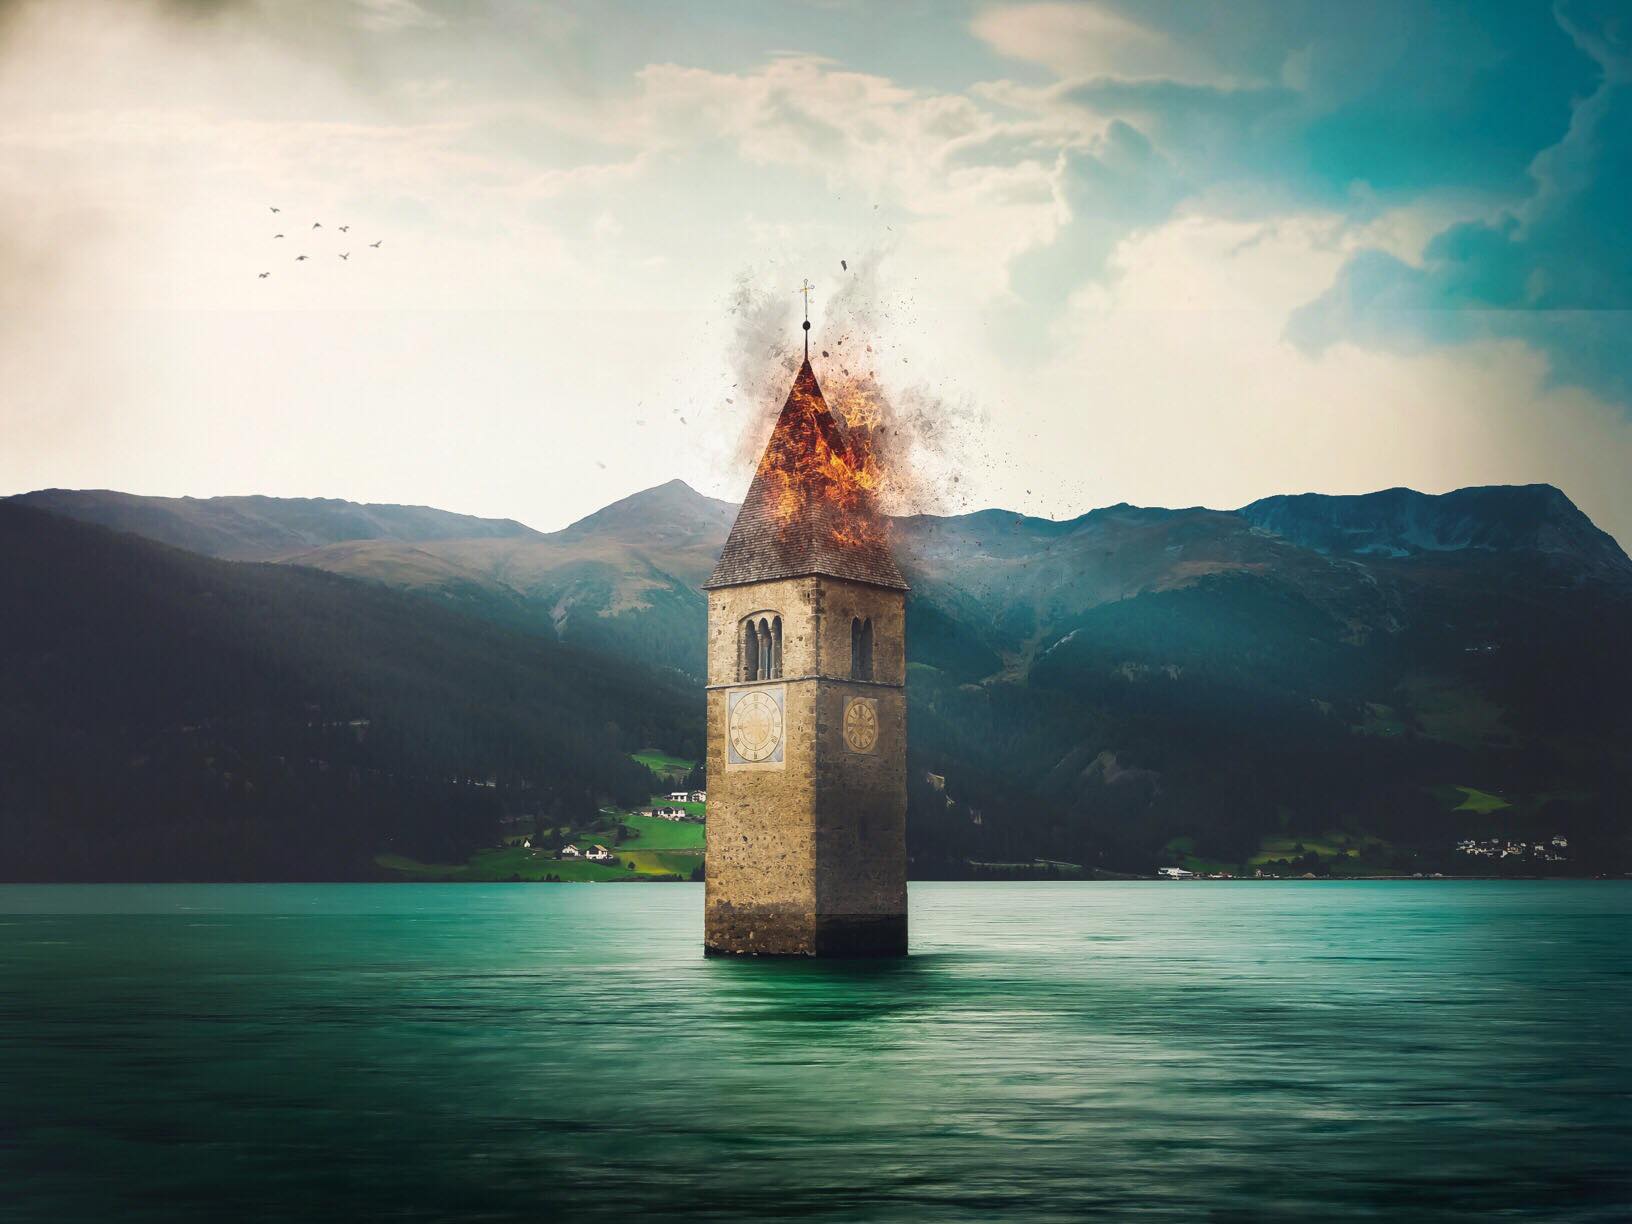 Image of castle tower in a flood and on fire